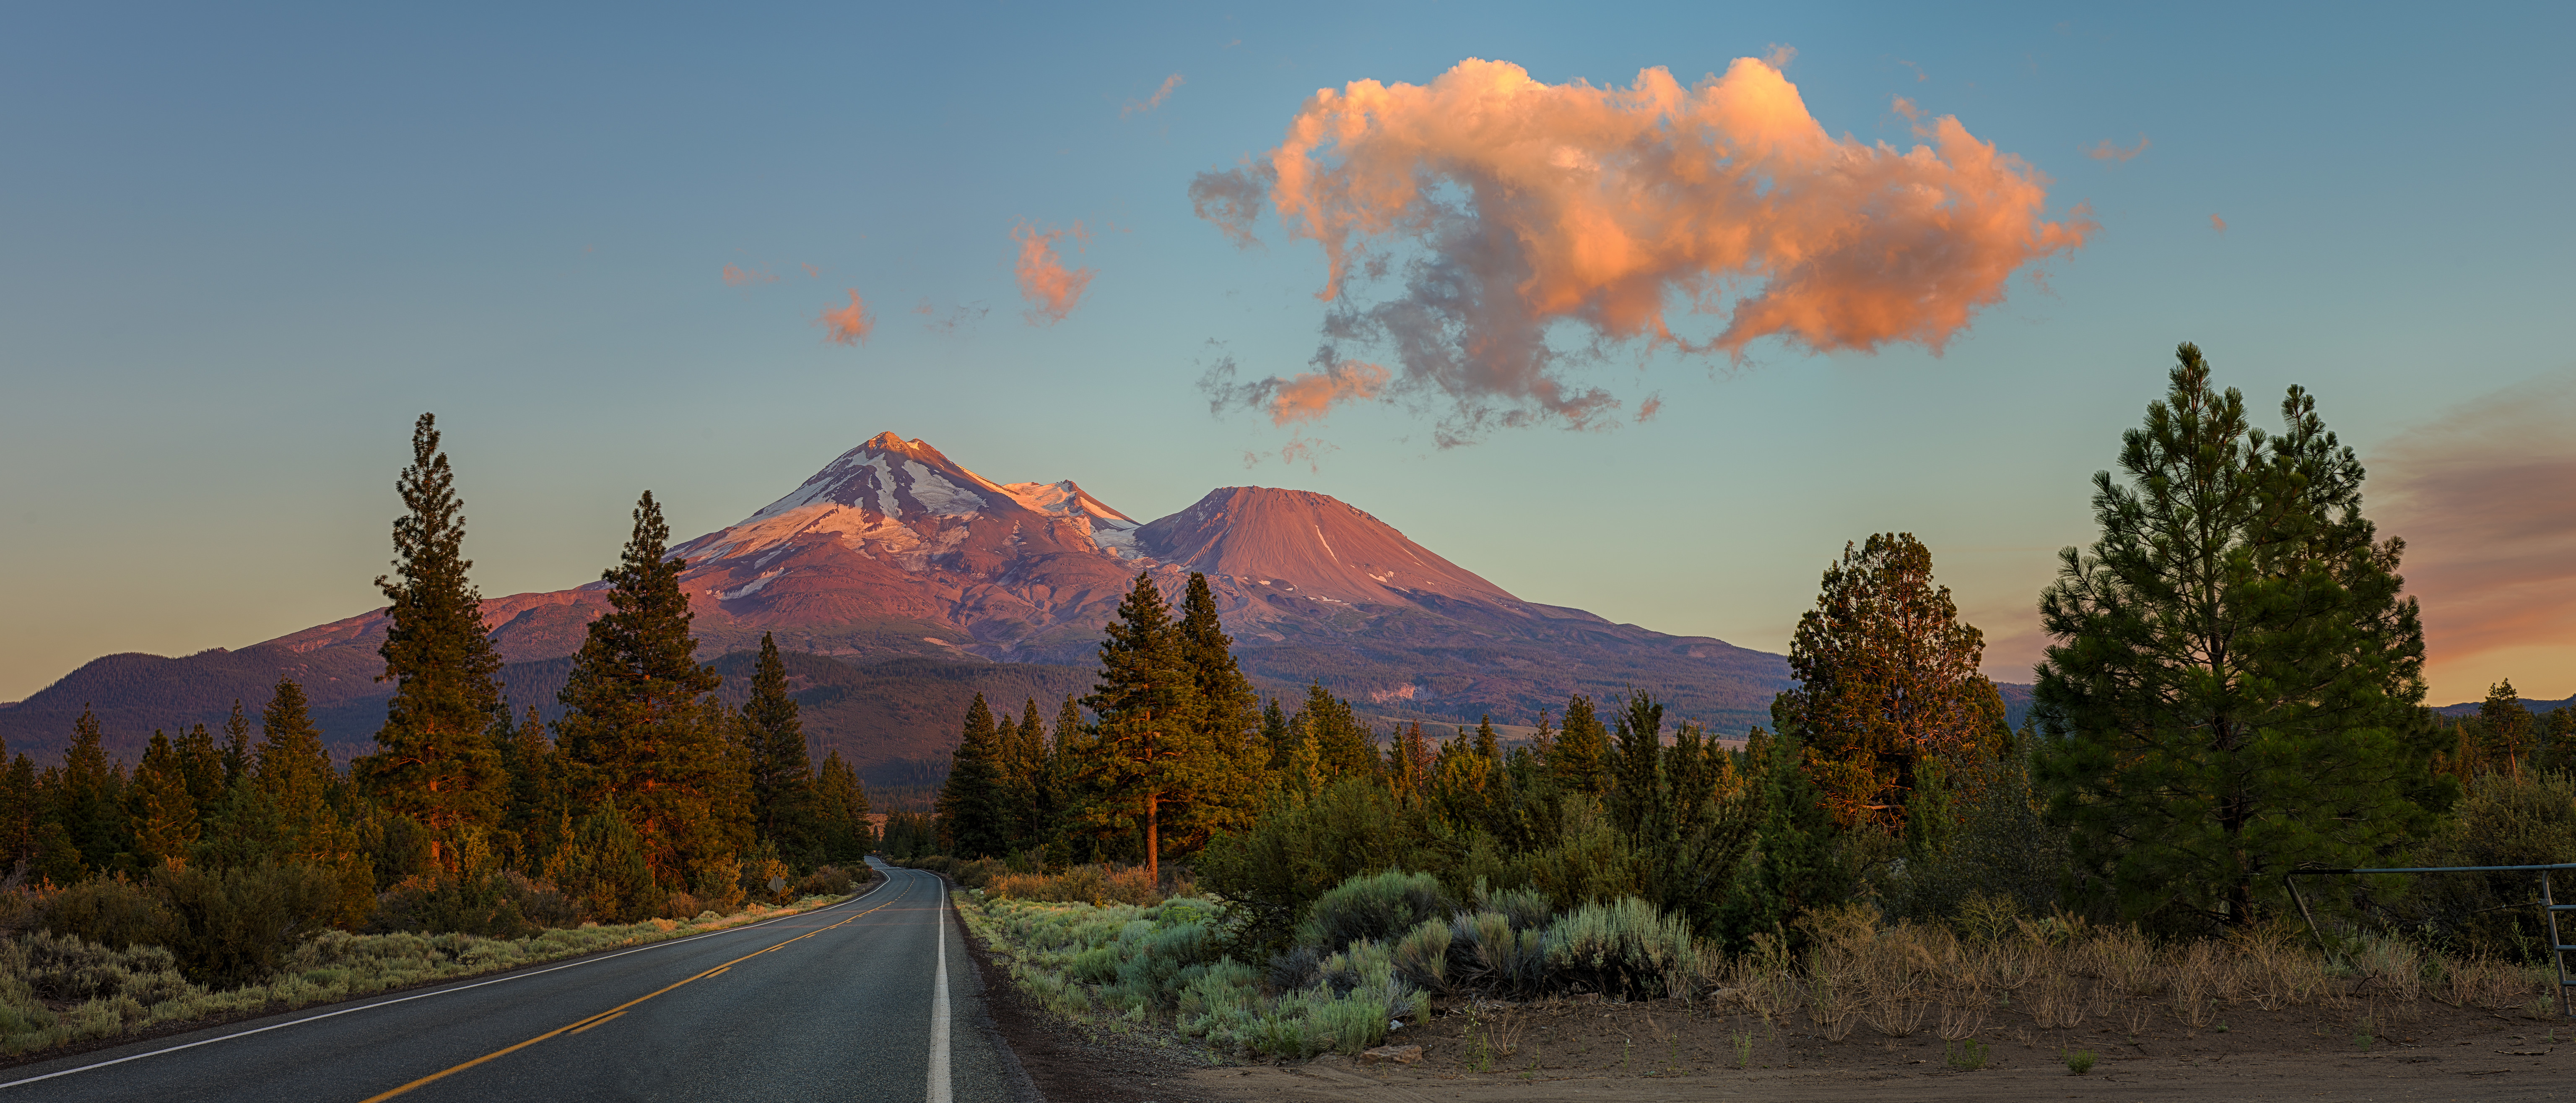 General 6144x2630 Mount Shasta California photography landscape sunset pine trees clouds sunset glow mountains snowy peak sunlight snow sky road trees